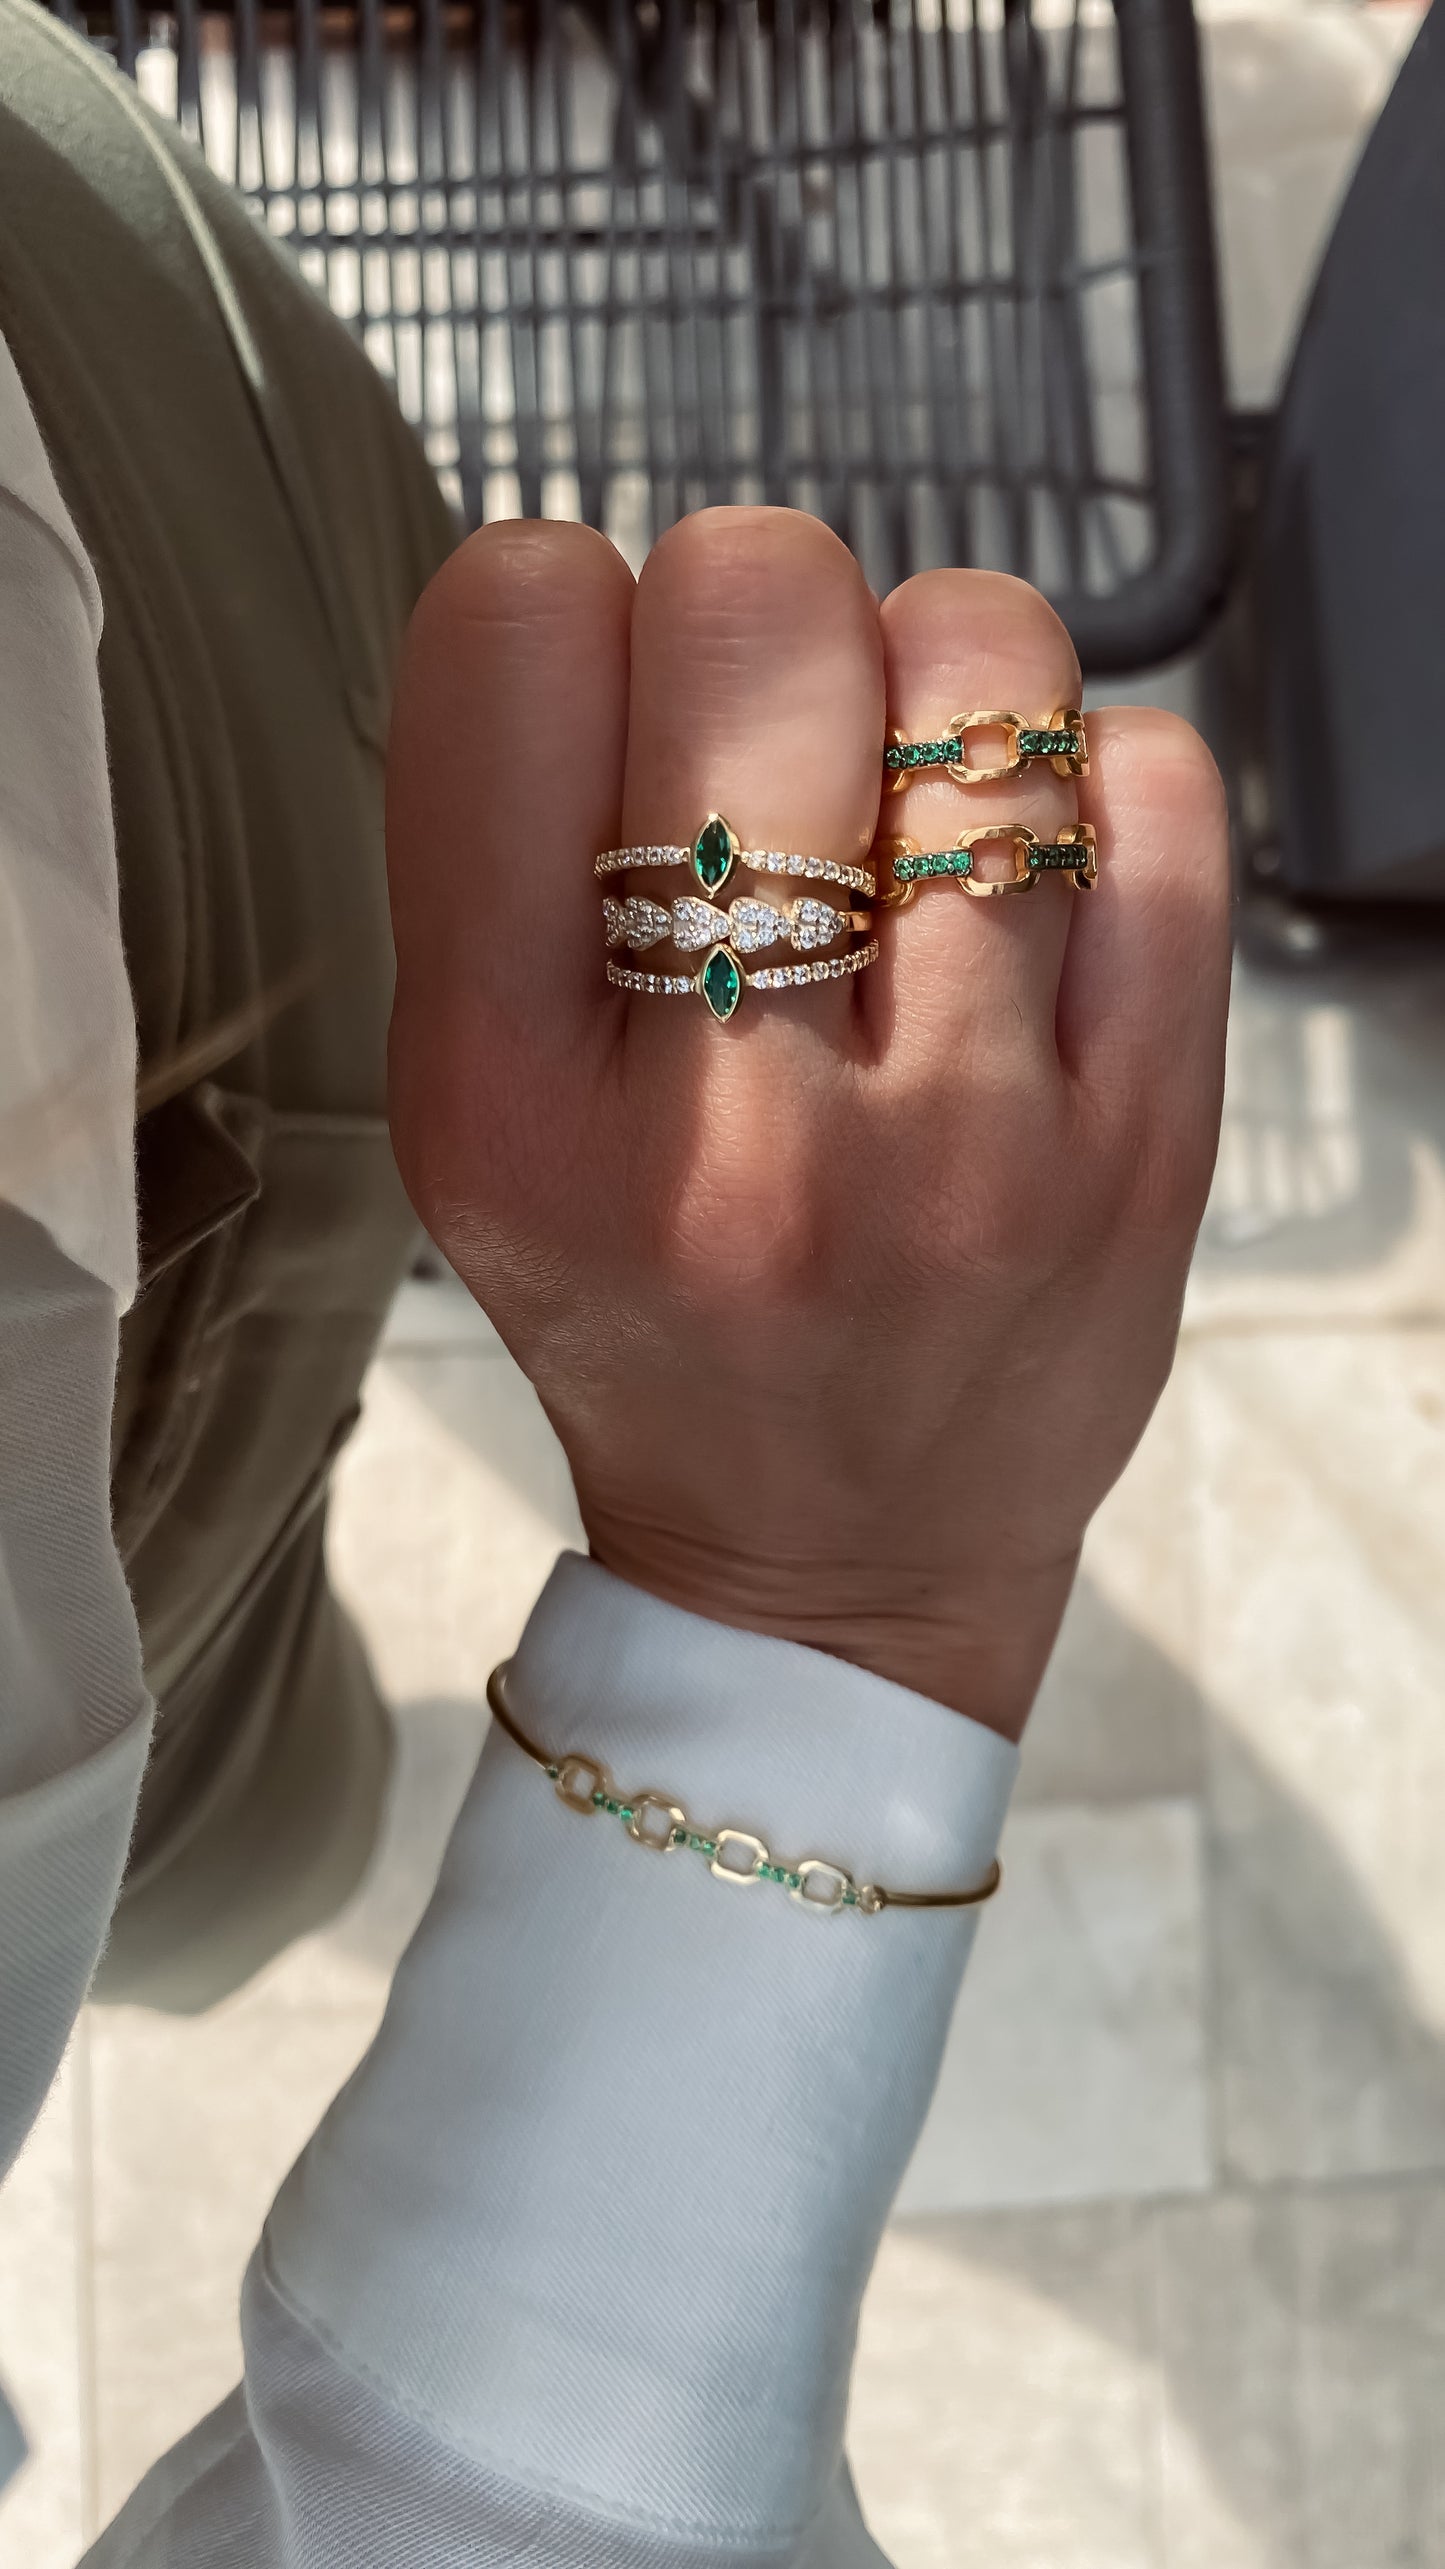 Double Emerald Chain Ring - Gold Plated